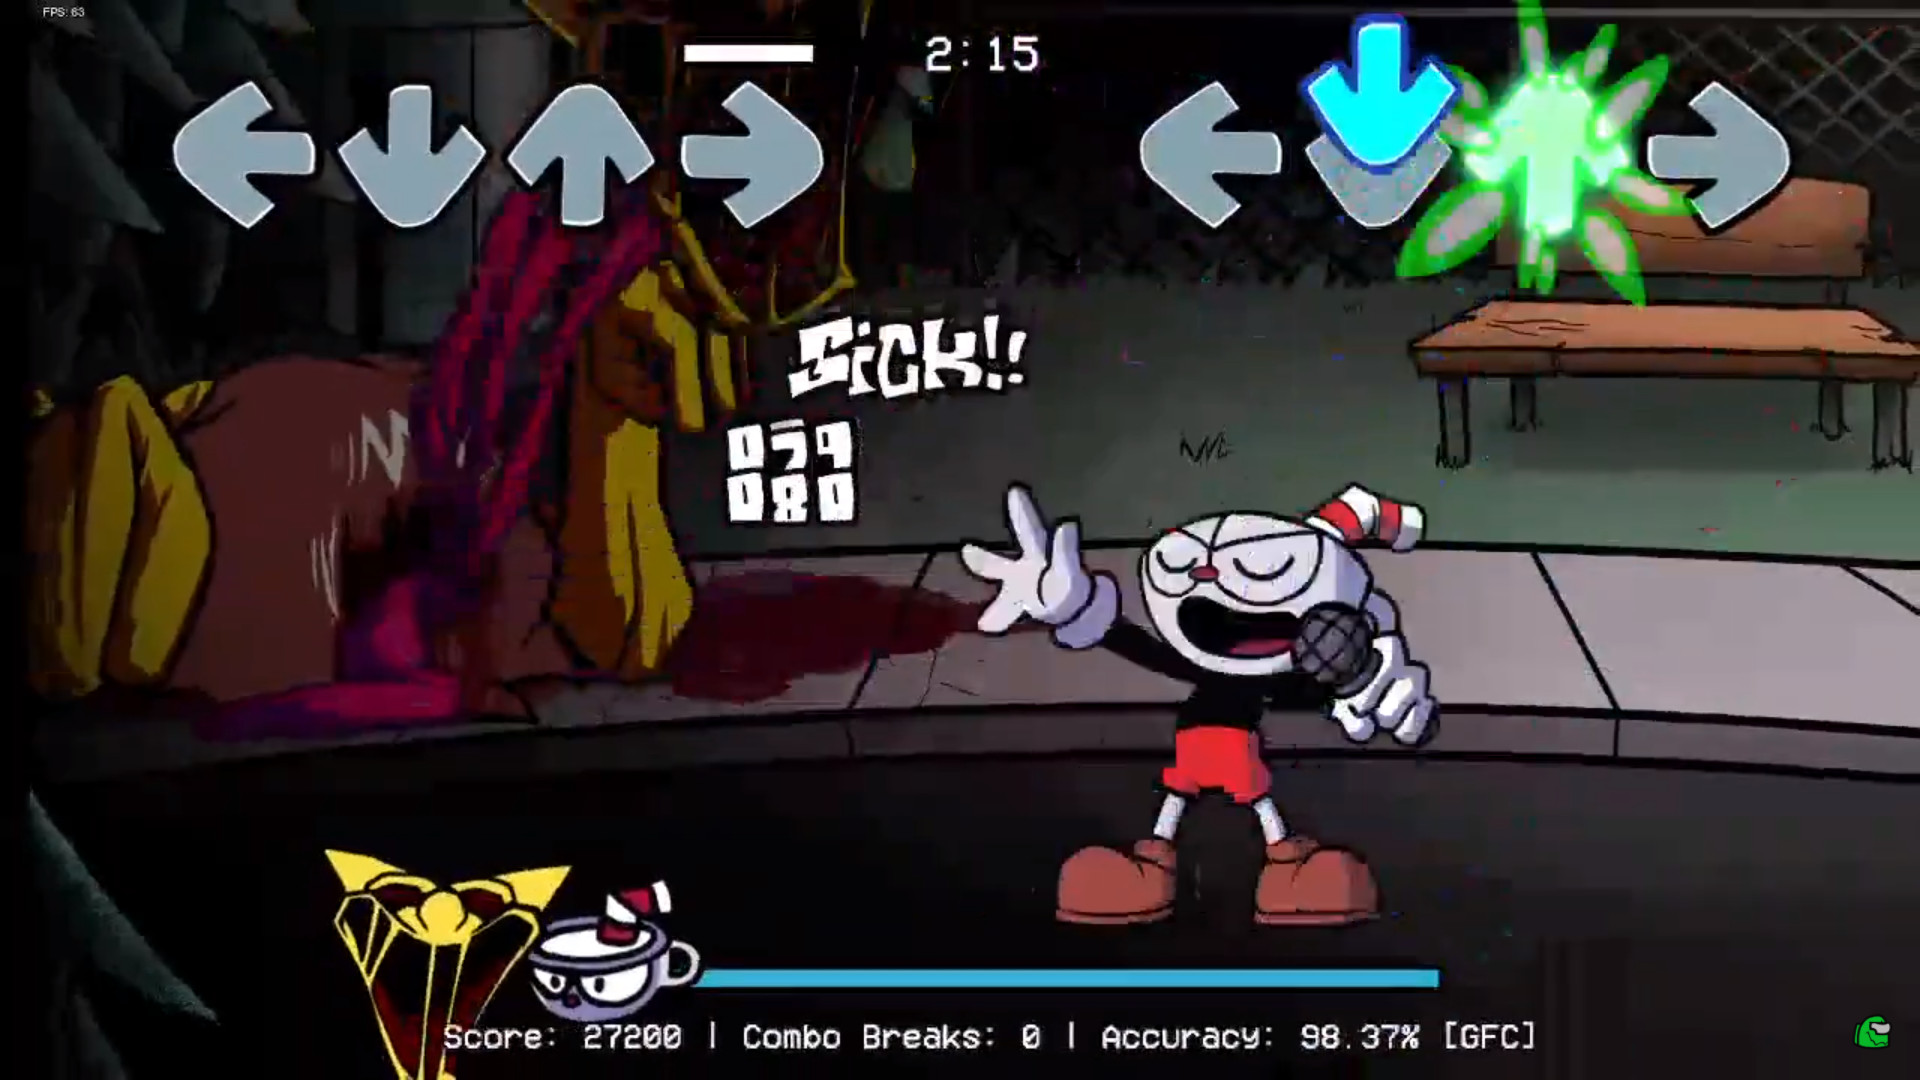 Fnf indie cross playable cuphead [Friday Night Funkin'] [Requests]